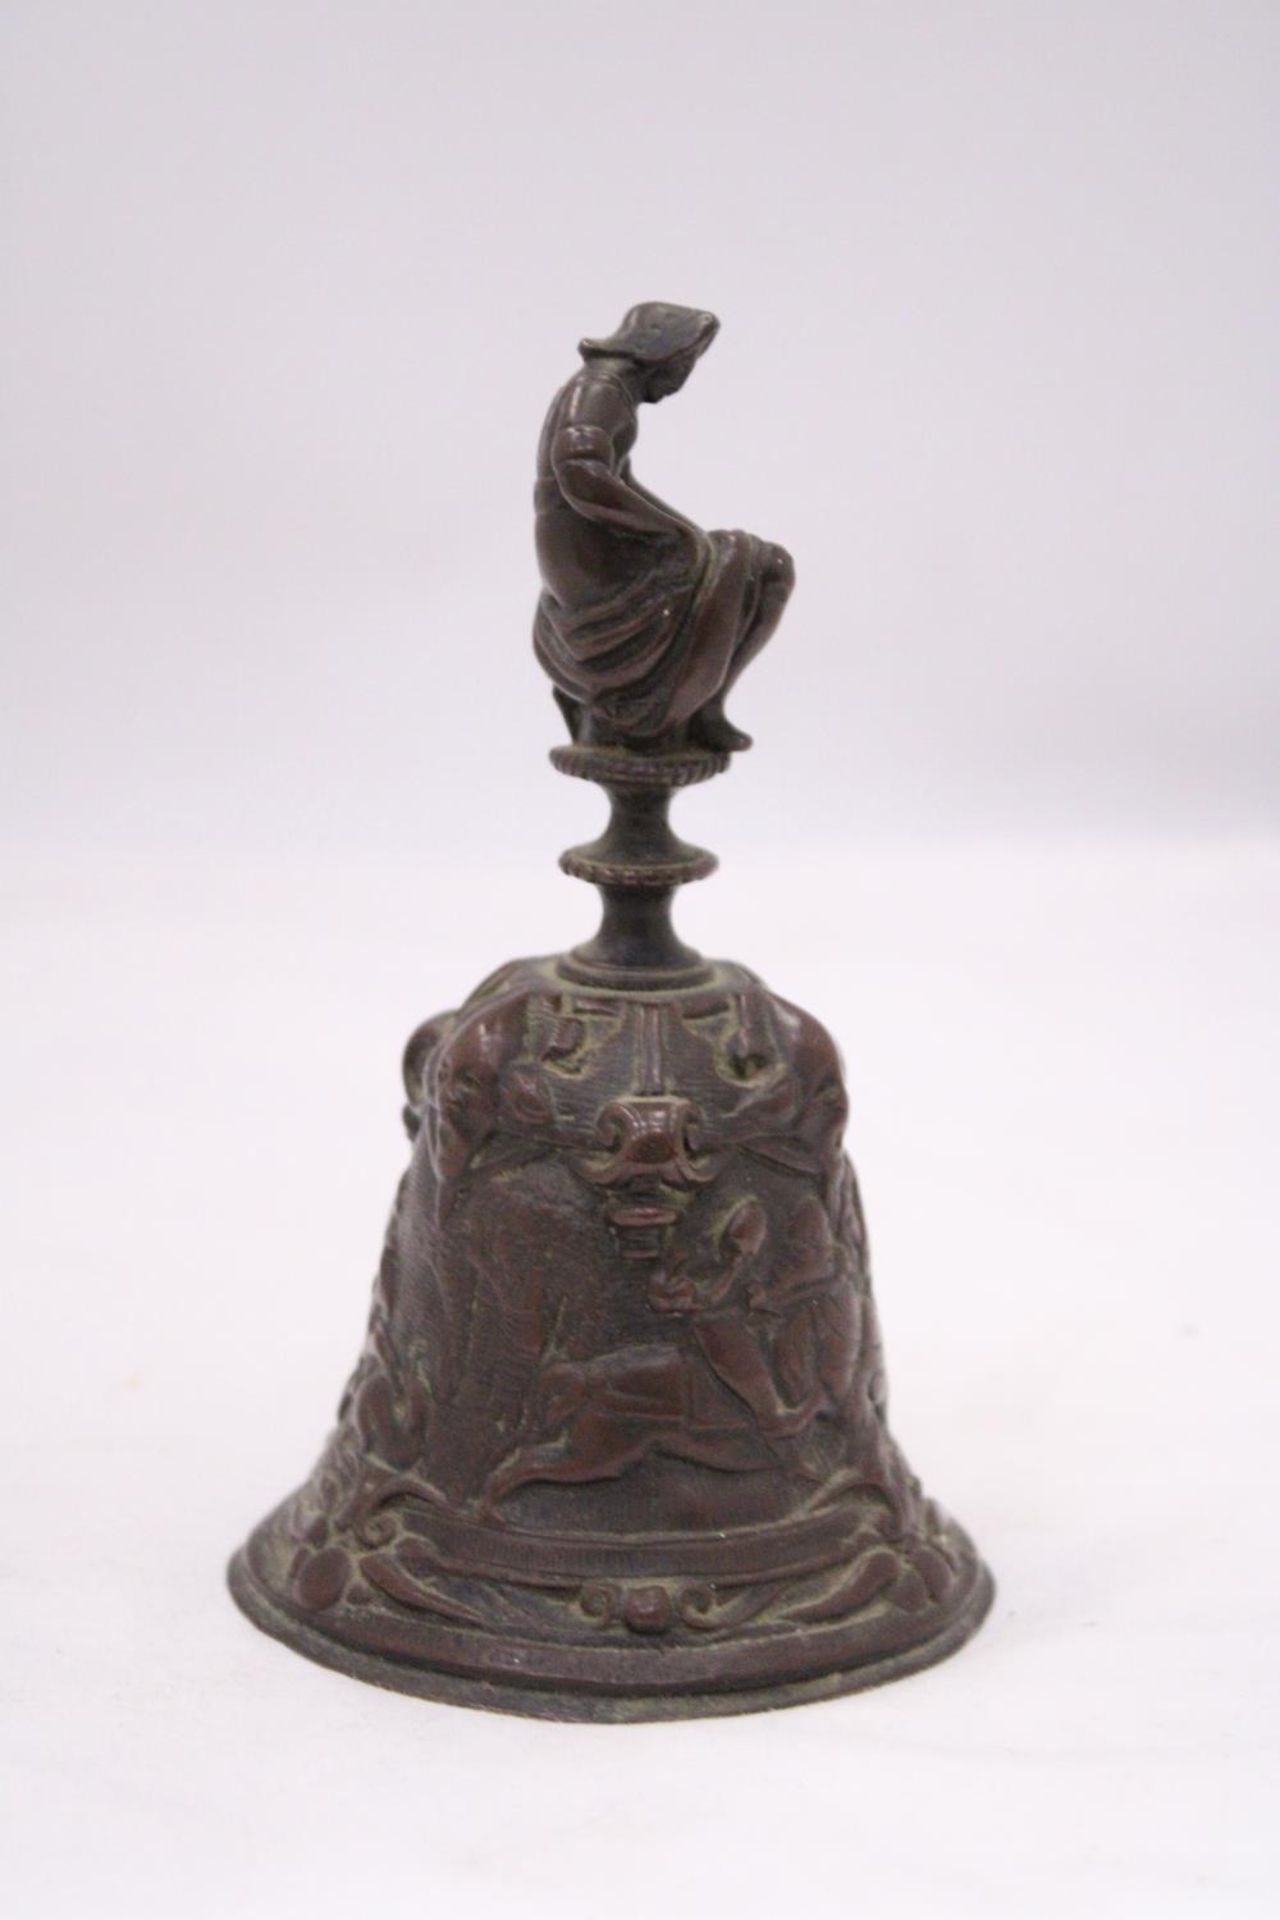 A ORIENTAL BRONZE BELL DEPICTING A HUNTING SCENE AROUND BASE OF BELL - Image 5 of 6